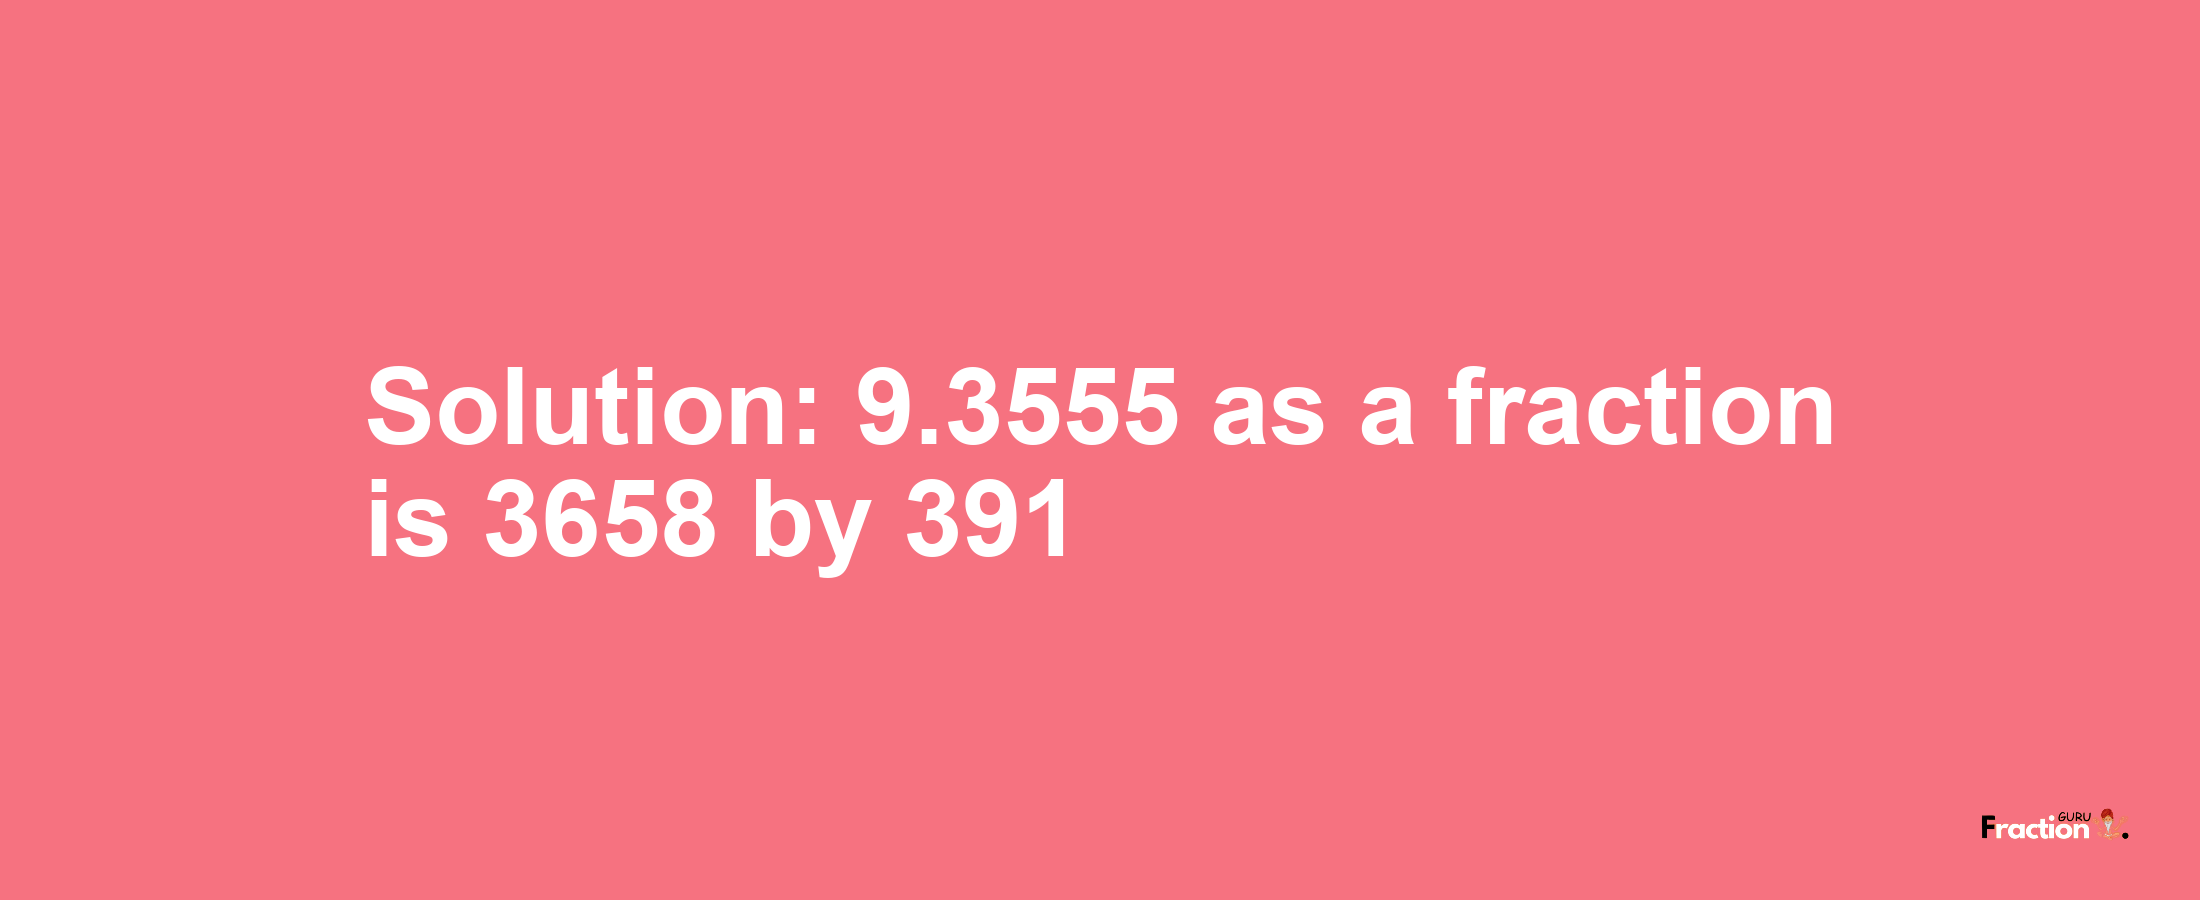 Solution:9.3555 as a fraction is 3658/391